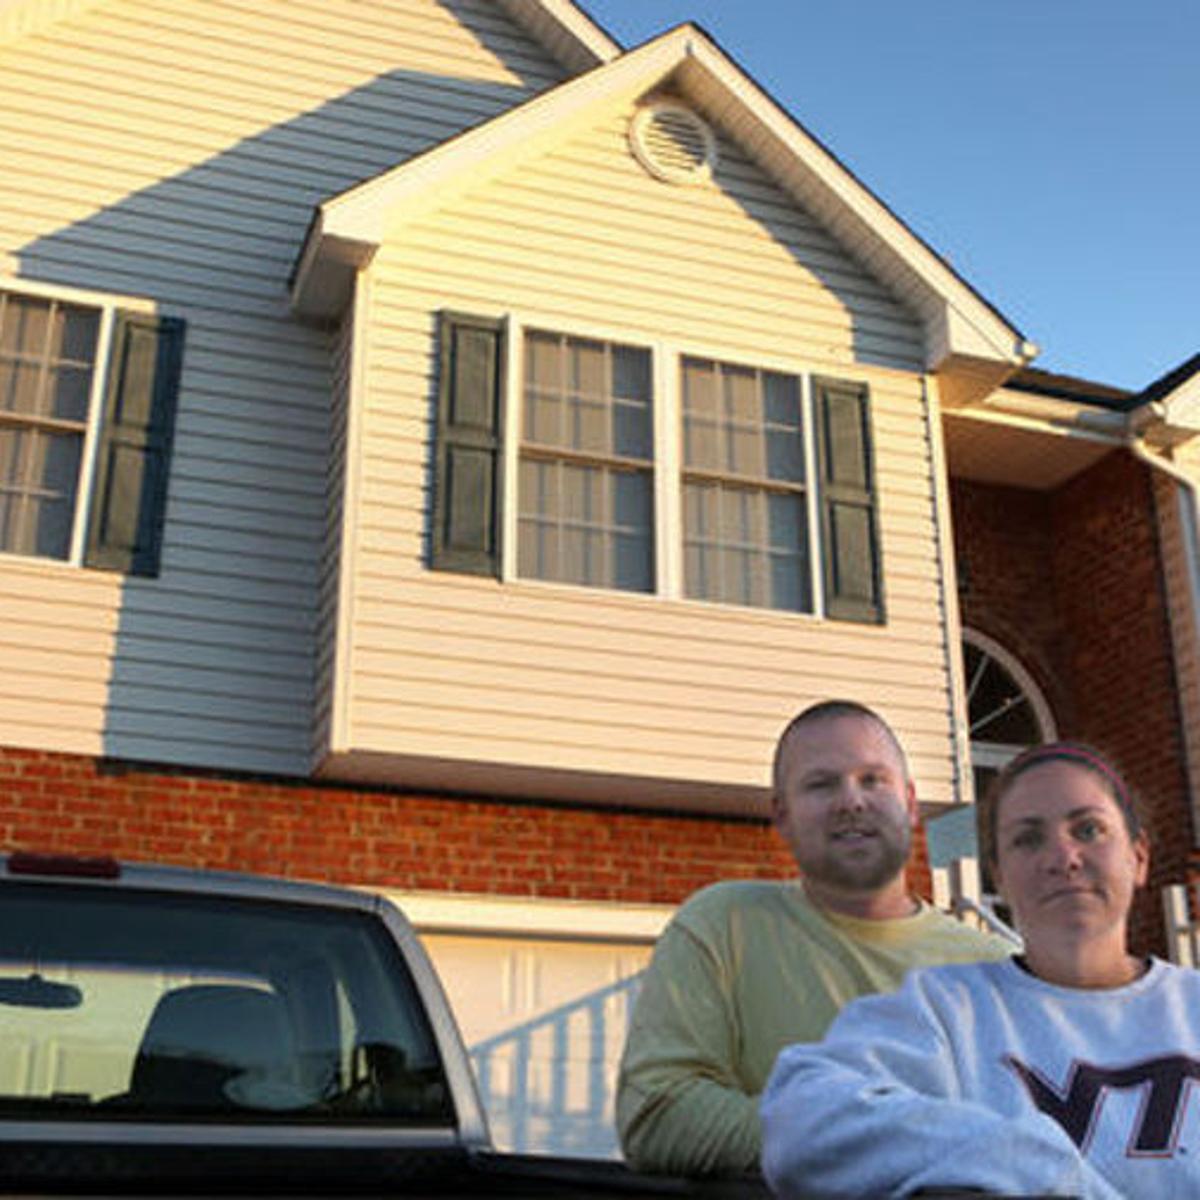 Blacksburg Family Stunned To Find Out Scammer Listed Their Home On